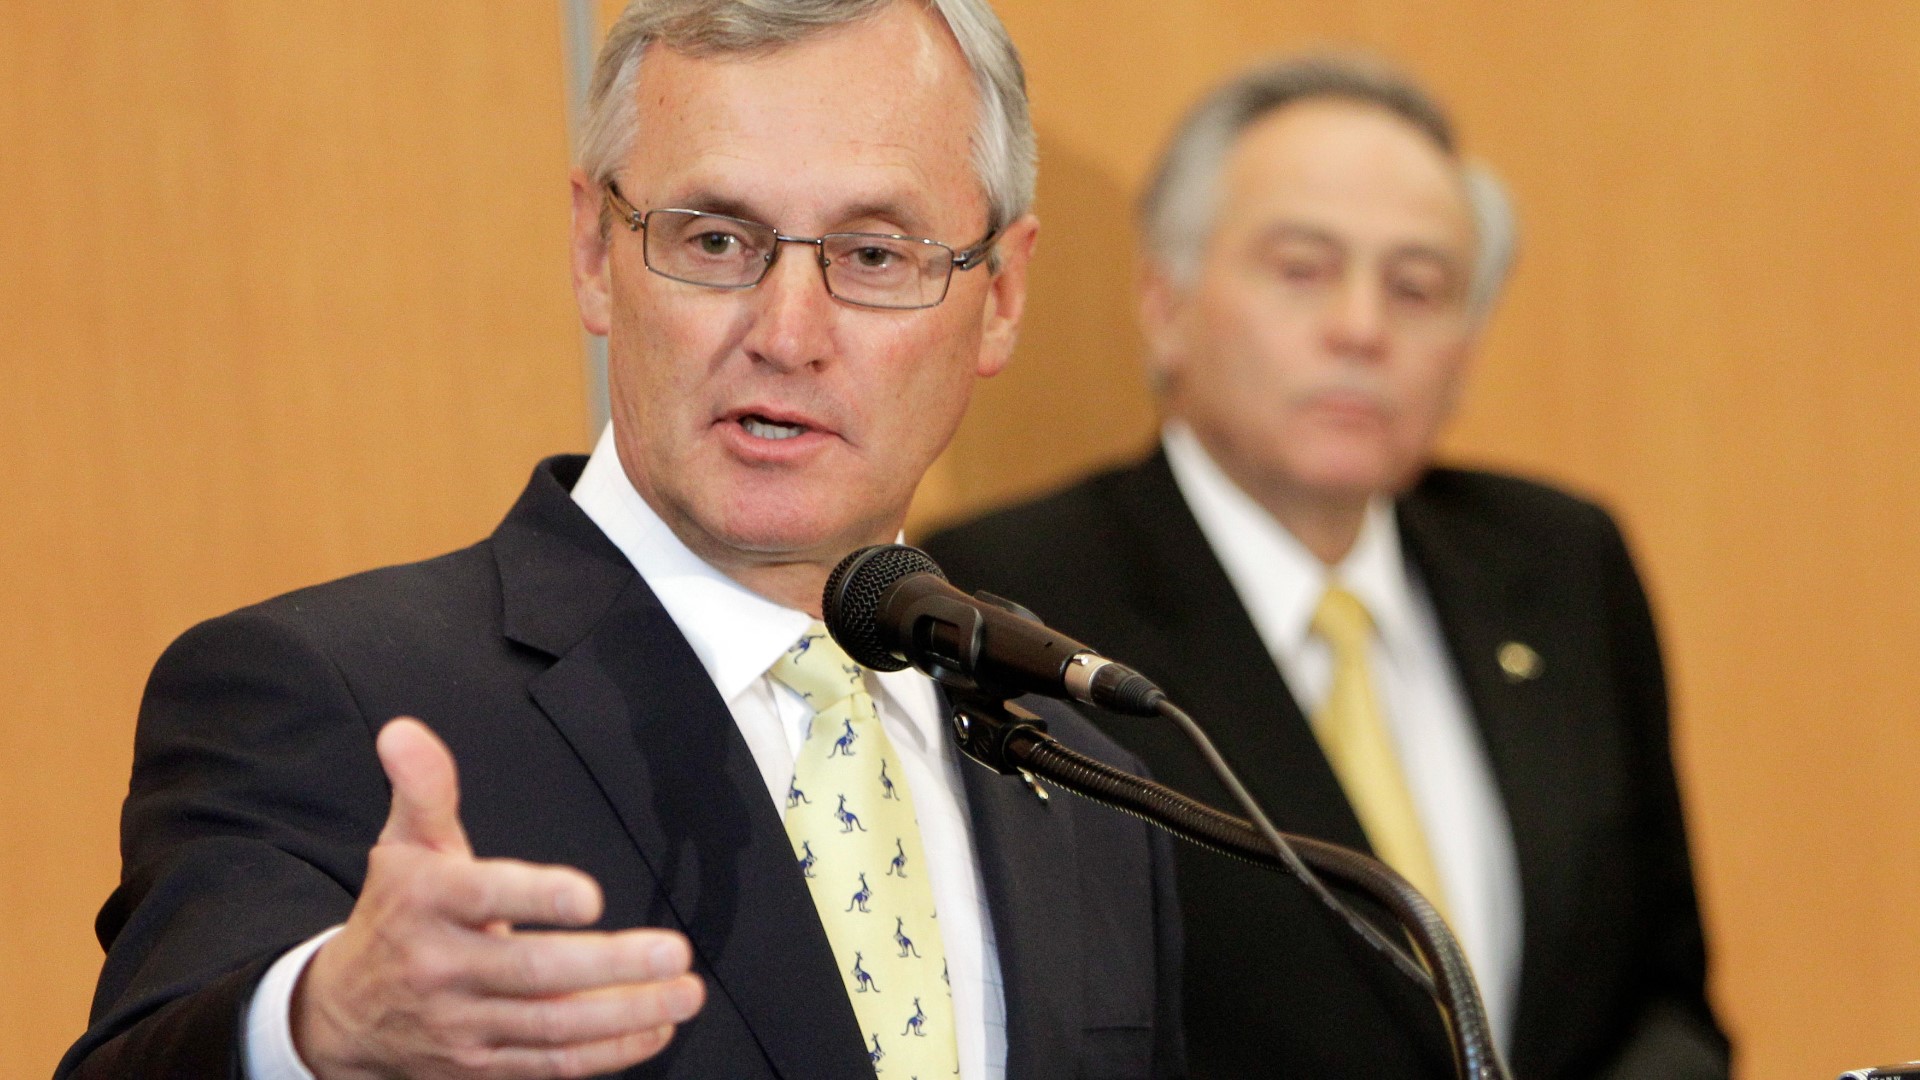 Tressel will serve as president of the university until Feb. 1, 2023.